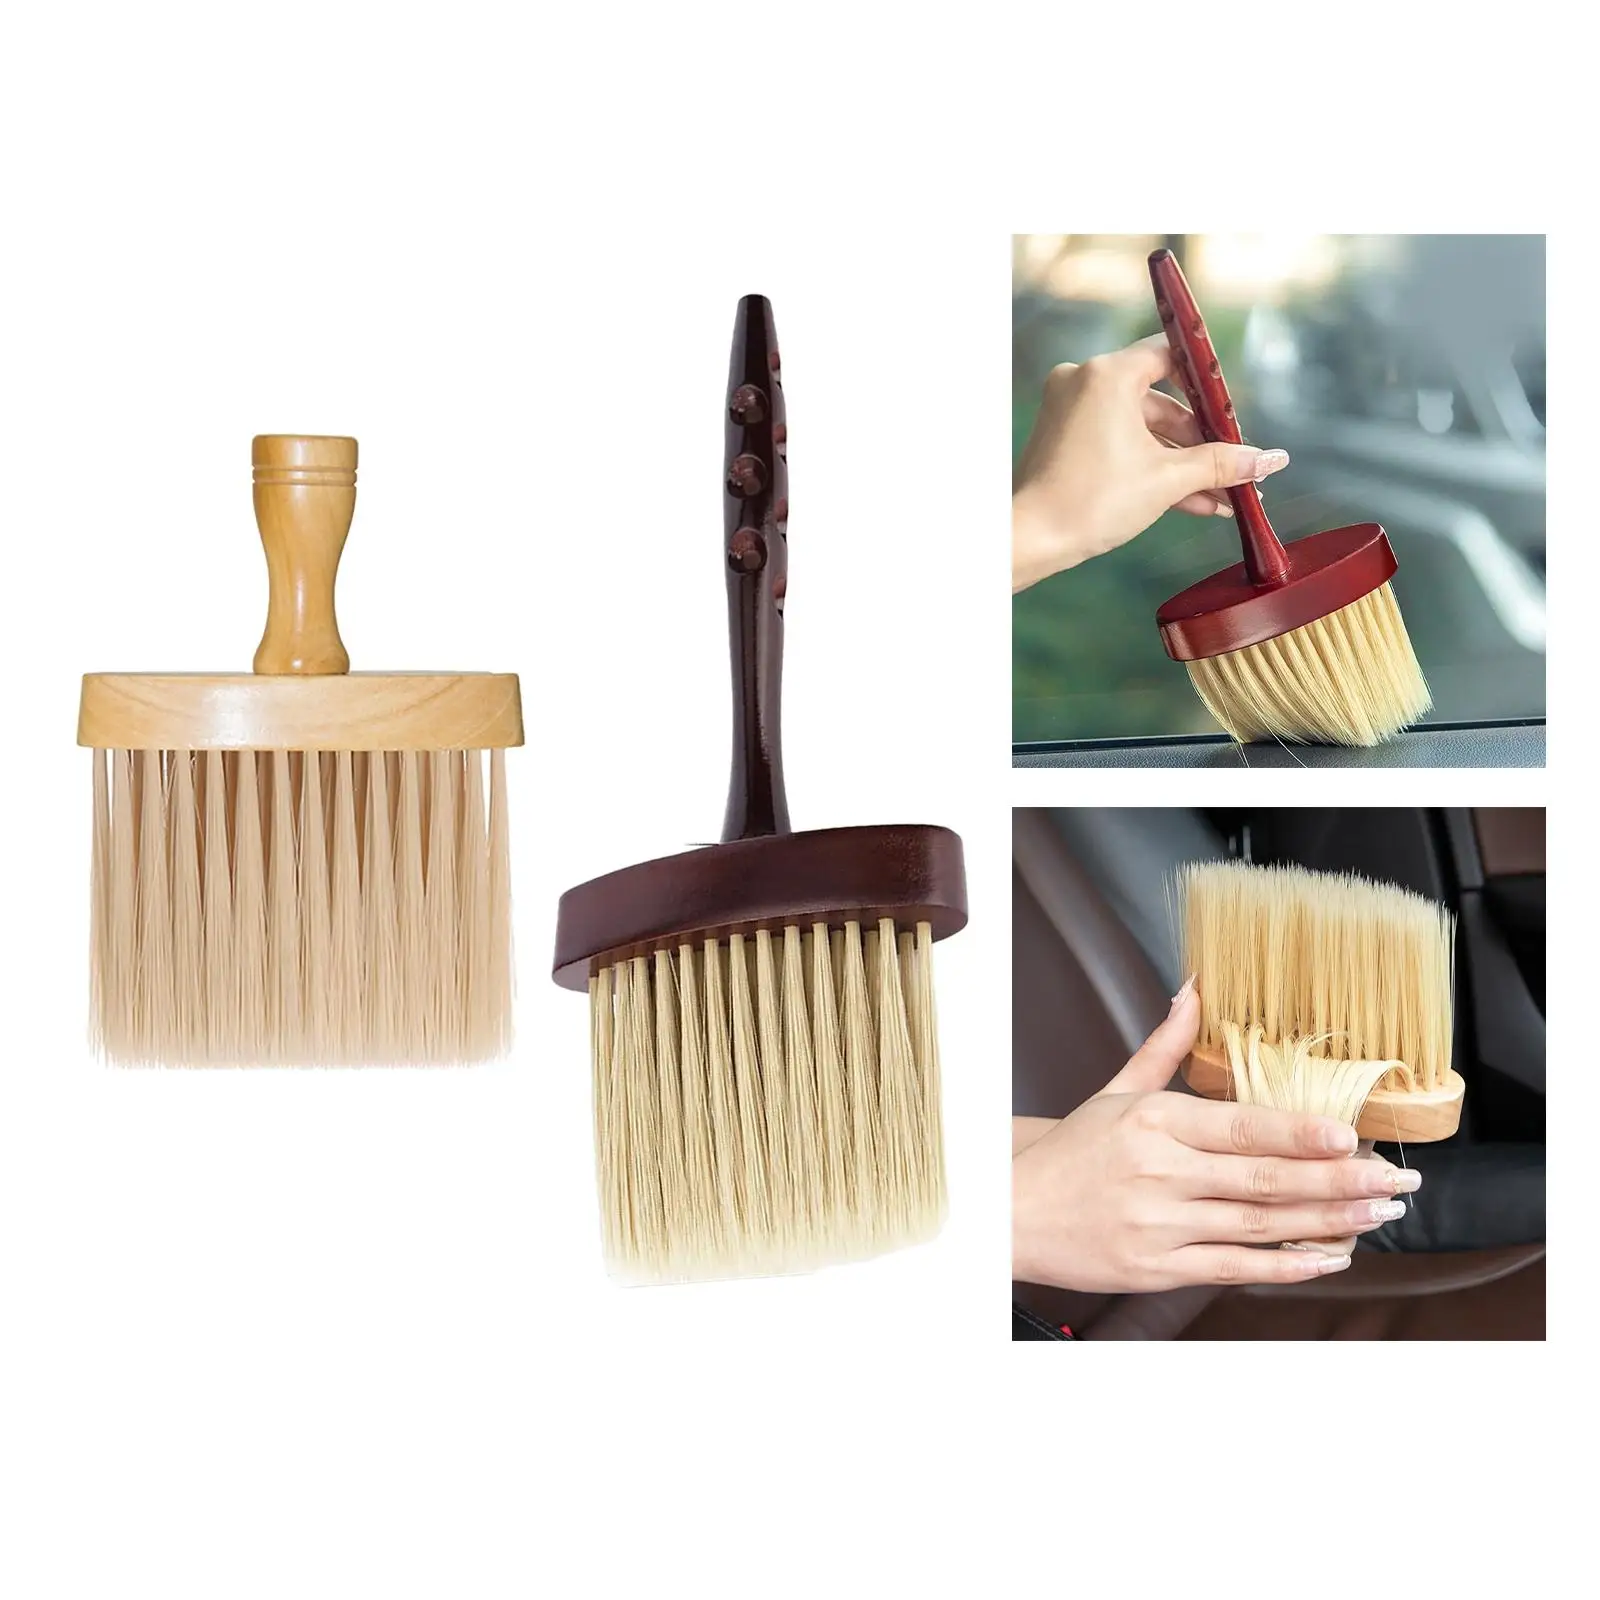 Automotive Car Interior Cleaning Wooden Brush for Leather, Computer, Fan Shutters Dust Remover Softs Sweeping ,Scratch 